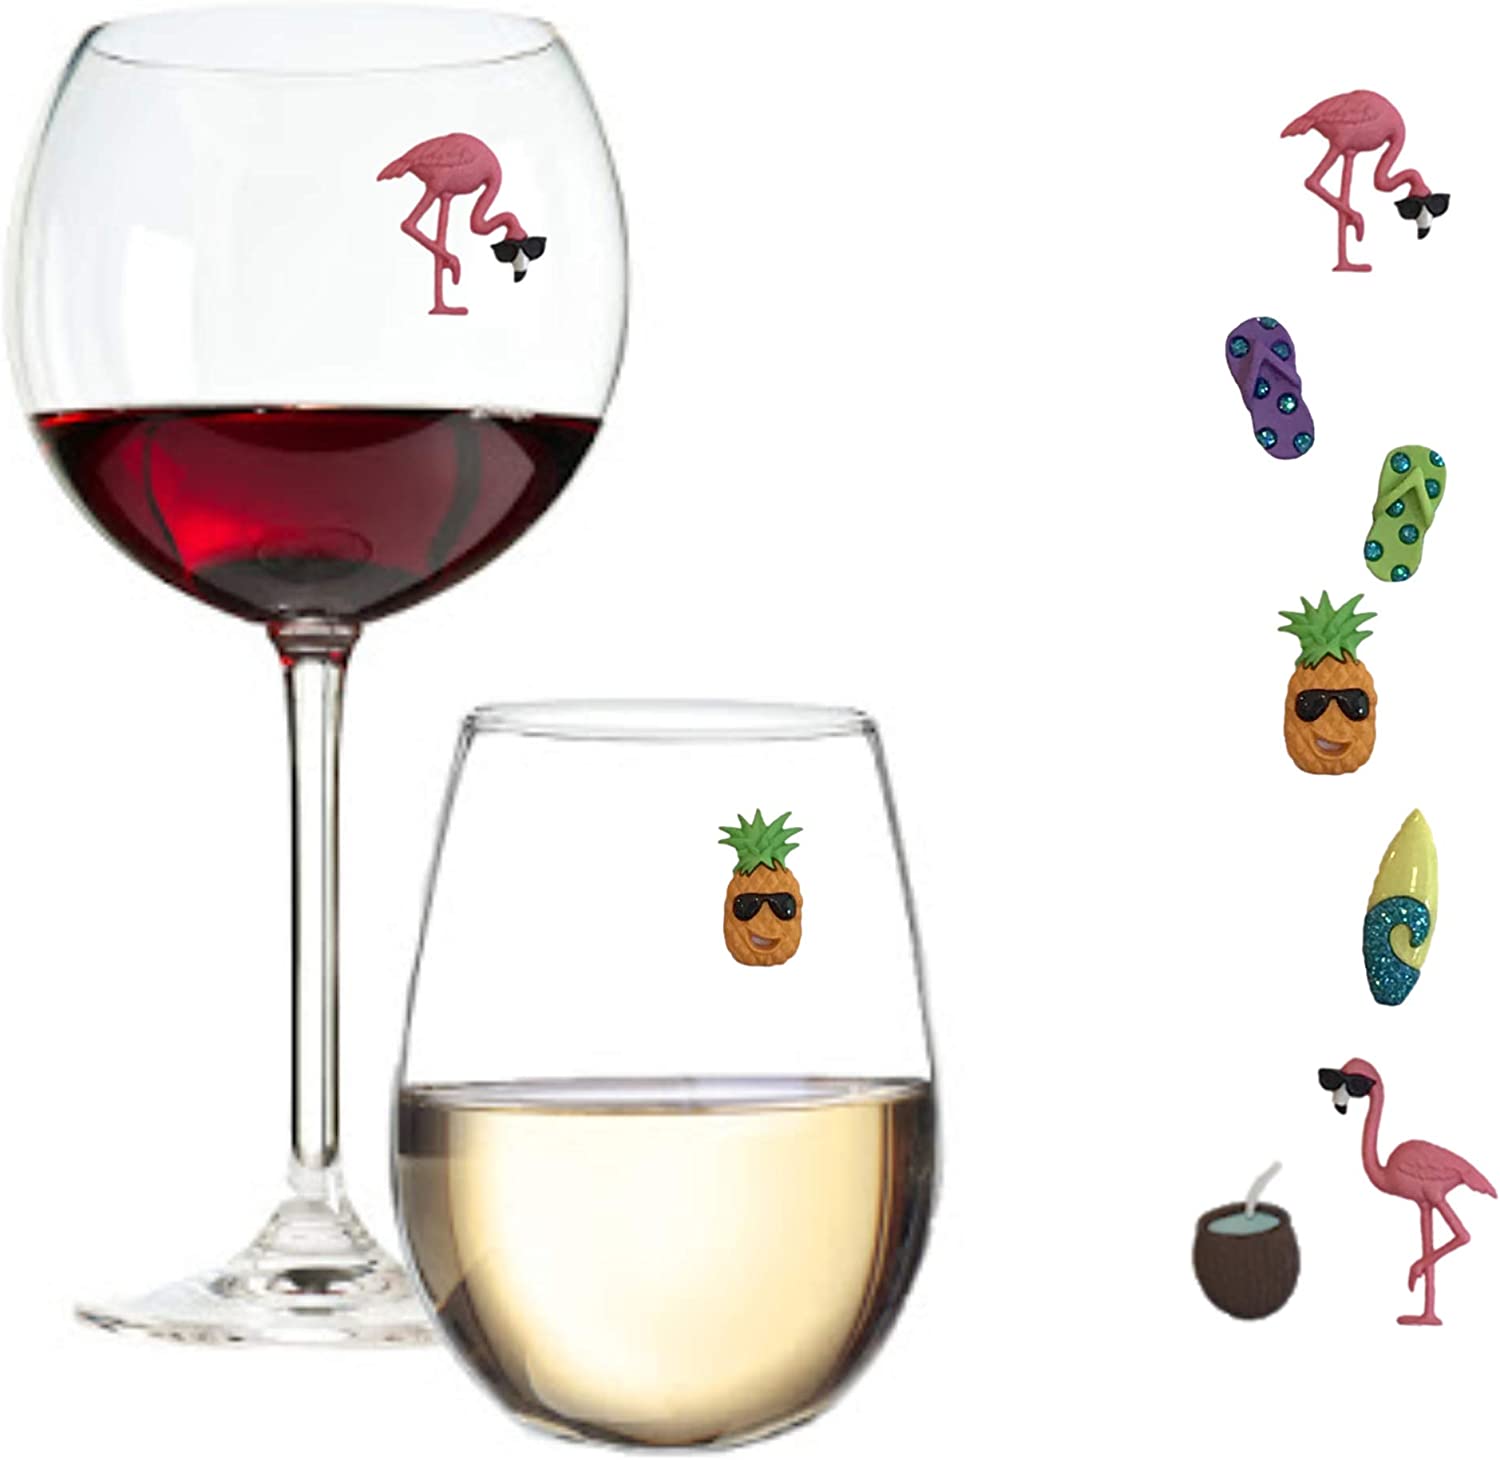 Flamingo Beach Wine Glass Charms – Set of 7 Magnetic Markers or Tags for Stemless or Regular Glassware by Simply Charmed